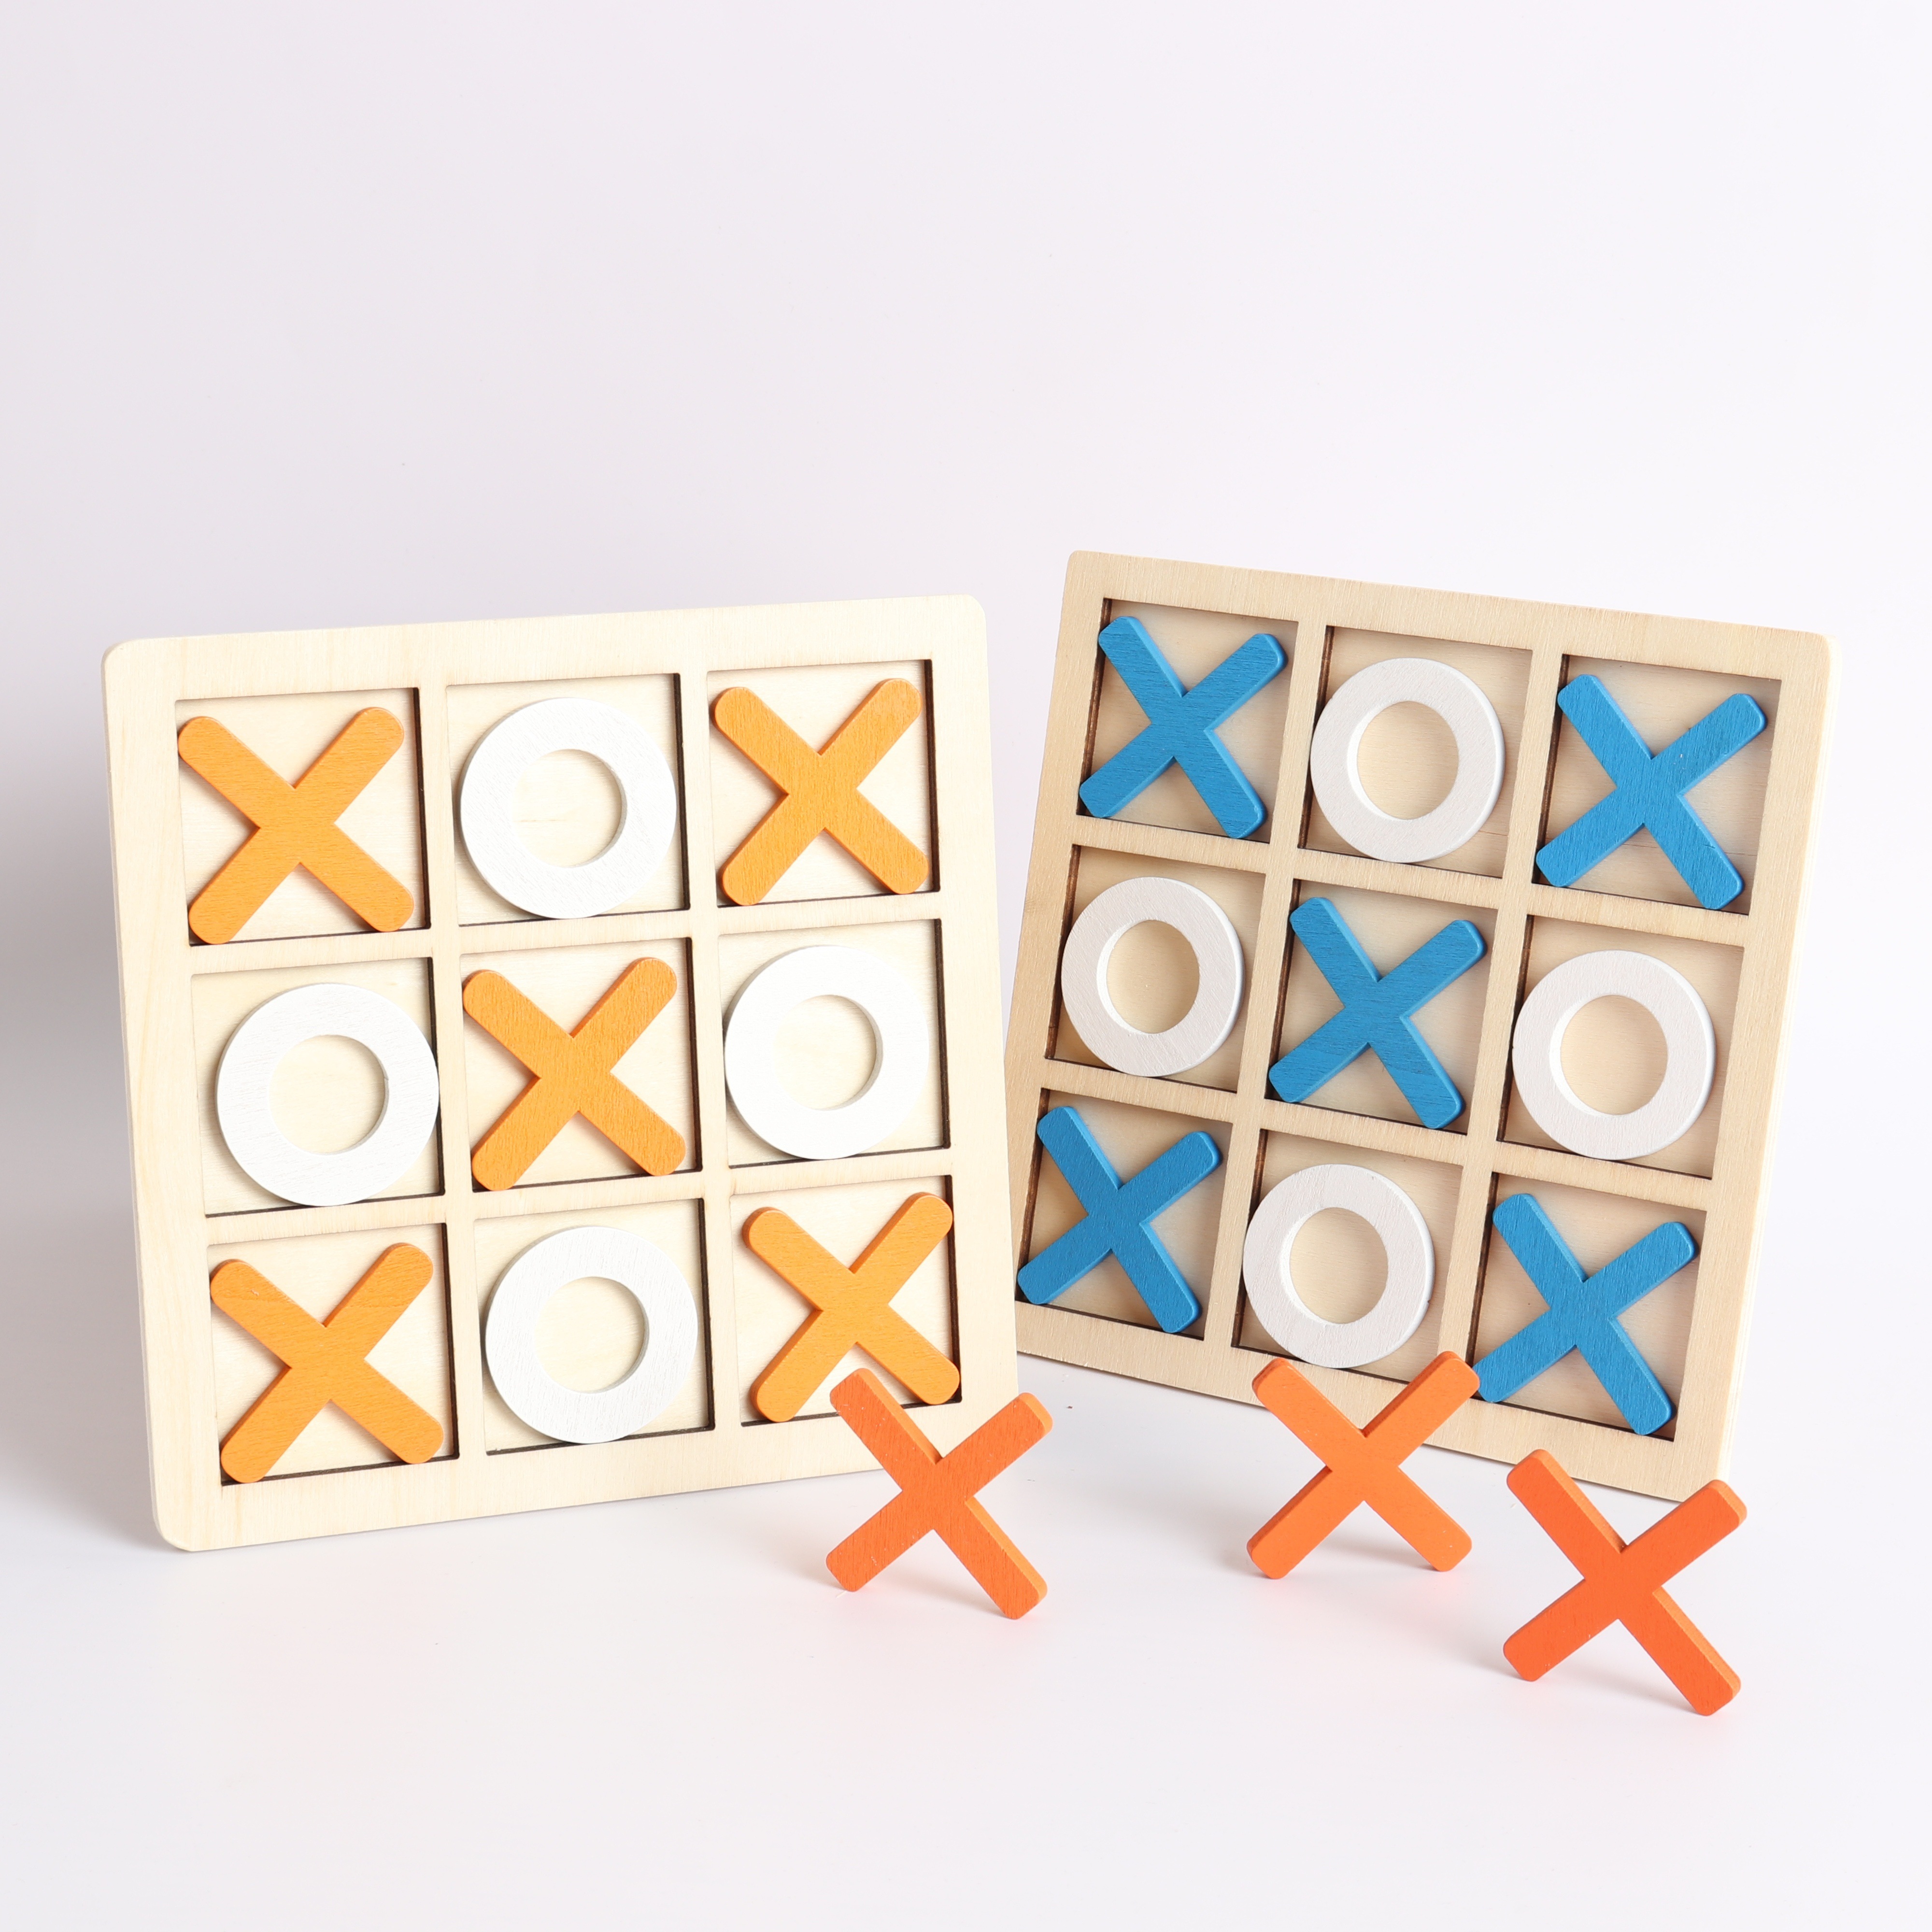 10″ Large Elegant Premium Black Tic Tac Toe Board Game for Adults & Kids, Wooden Puzzle Game, Coffee Table Wooden Decor & Games